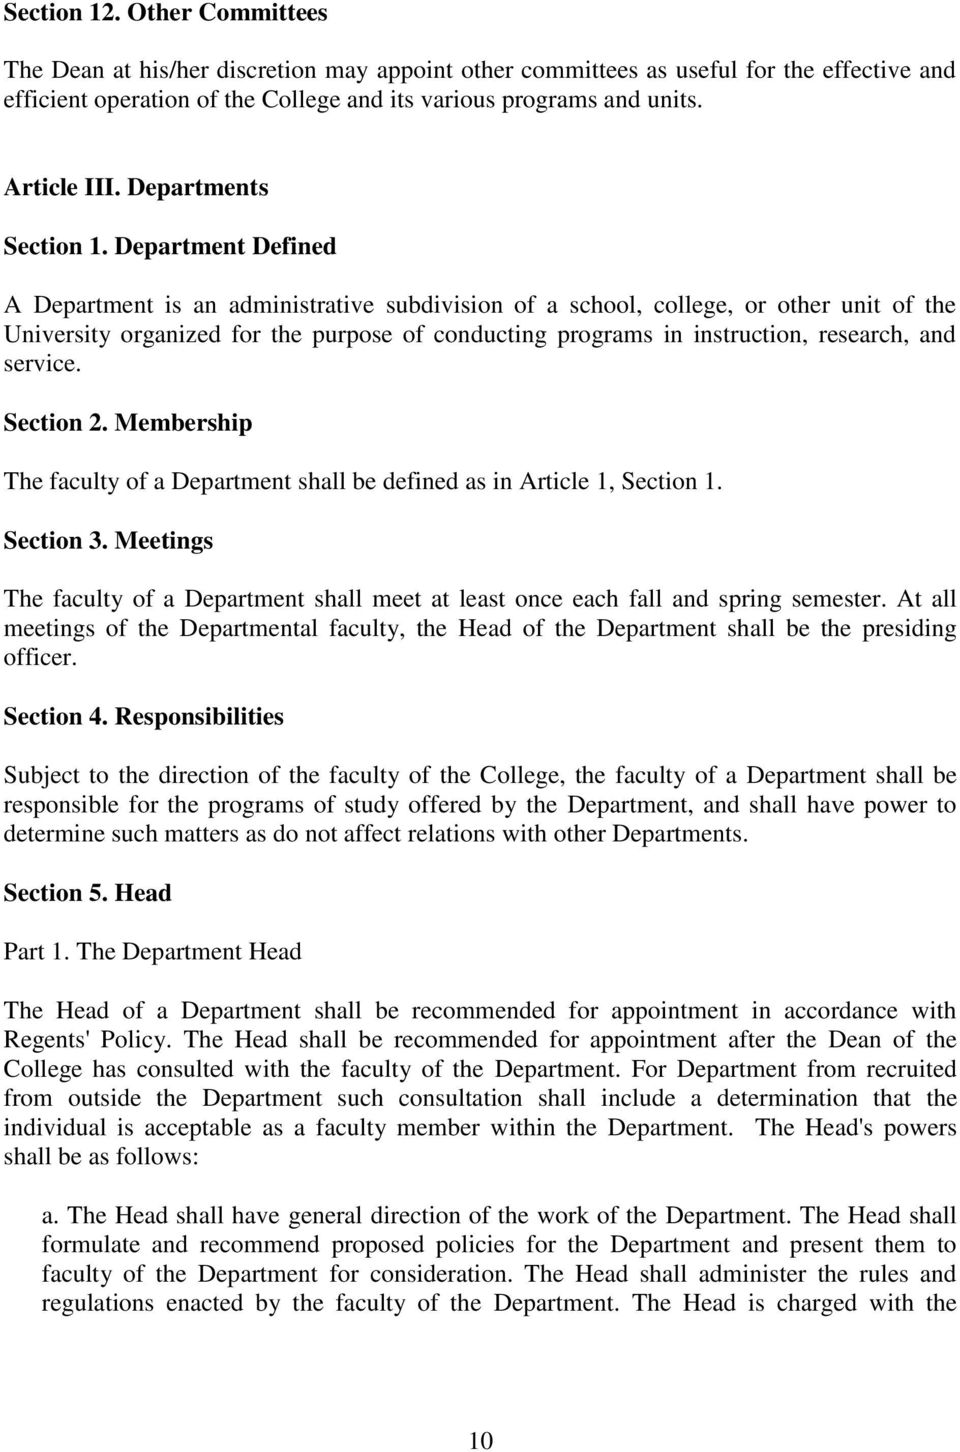 Department Defined A Department is an administrative subdivision of a school, college, or other unit of the University organized for the purpose of conducting programs in instruction, research, and